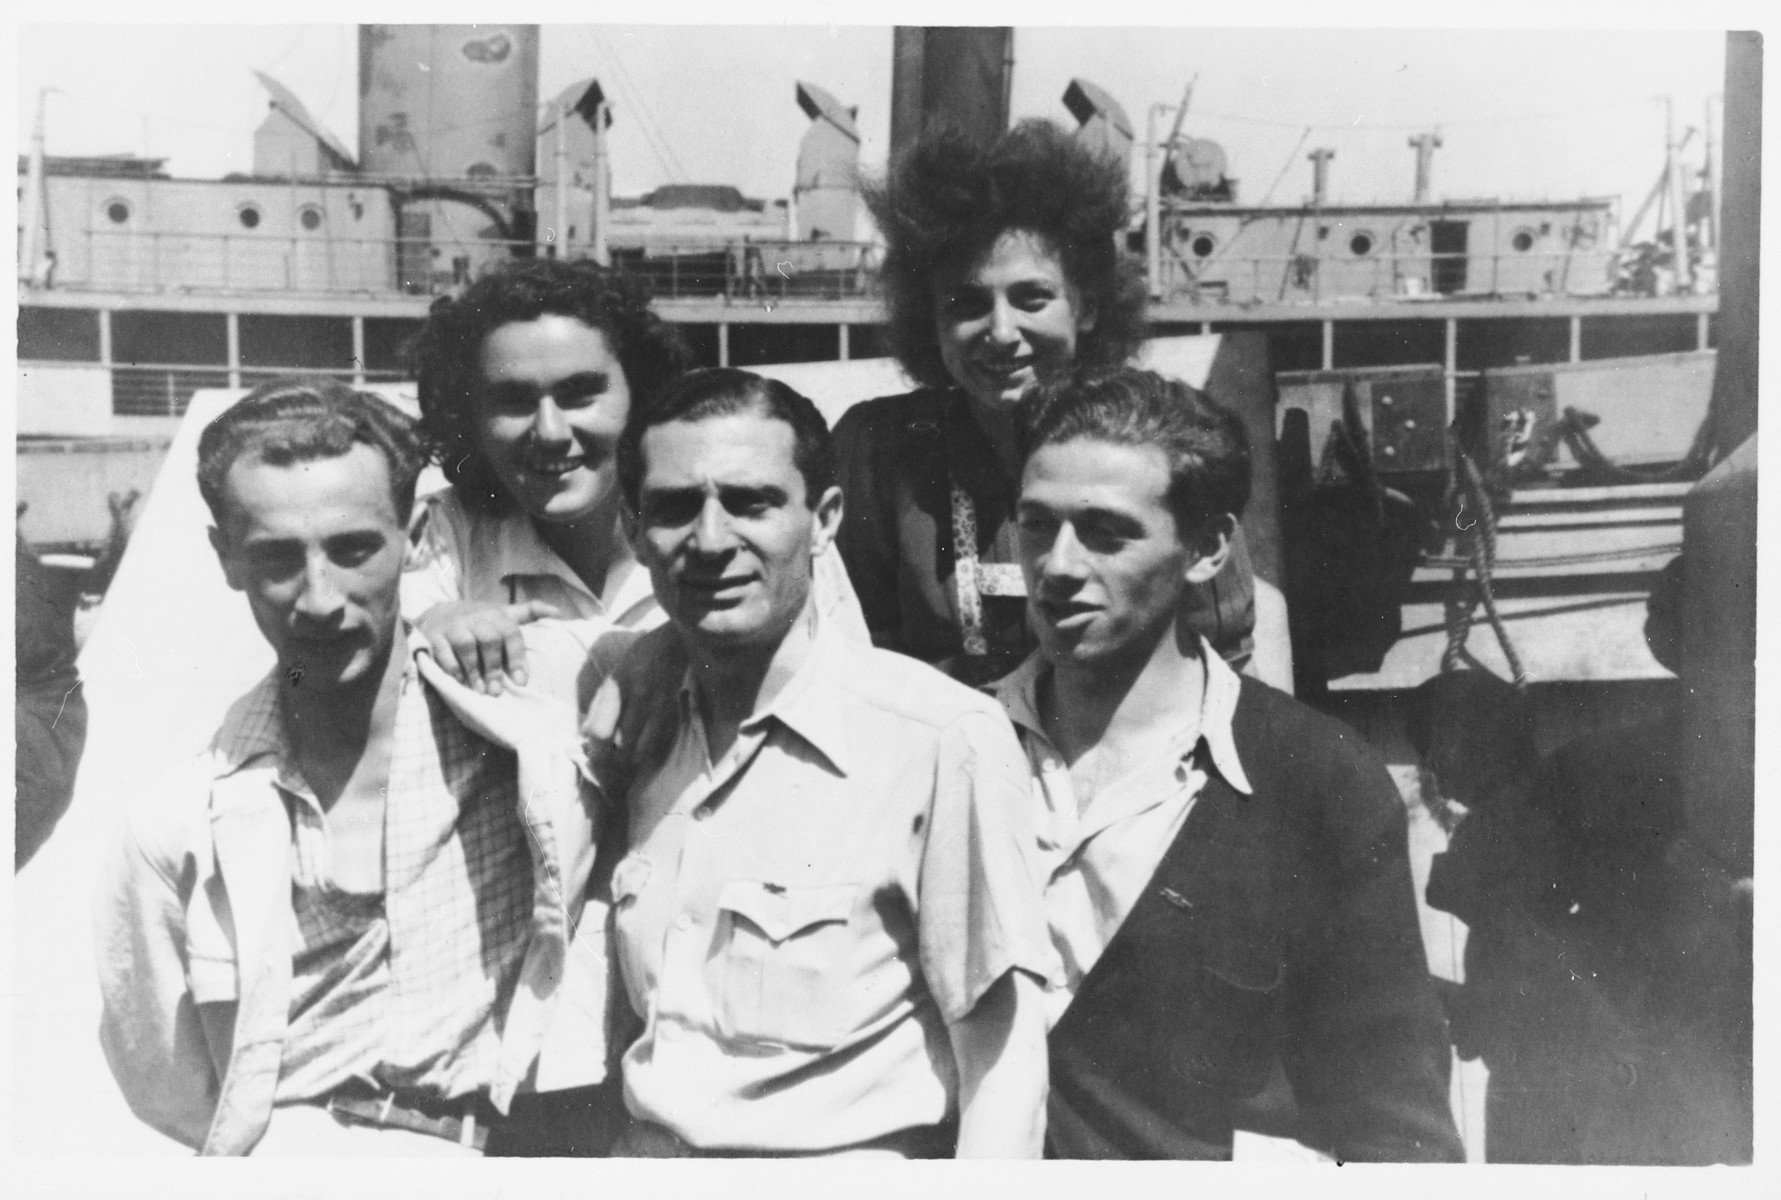 Group portrait of members of the Armée Juive French Jewish resistance at a reunion in Palestine in Kibbutz Sde Eliyahu.

Among those pictured is Simon Levitte, the head of Armée Juive (center).